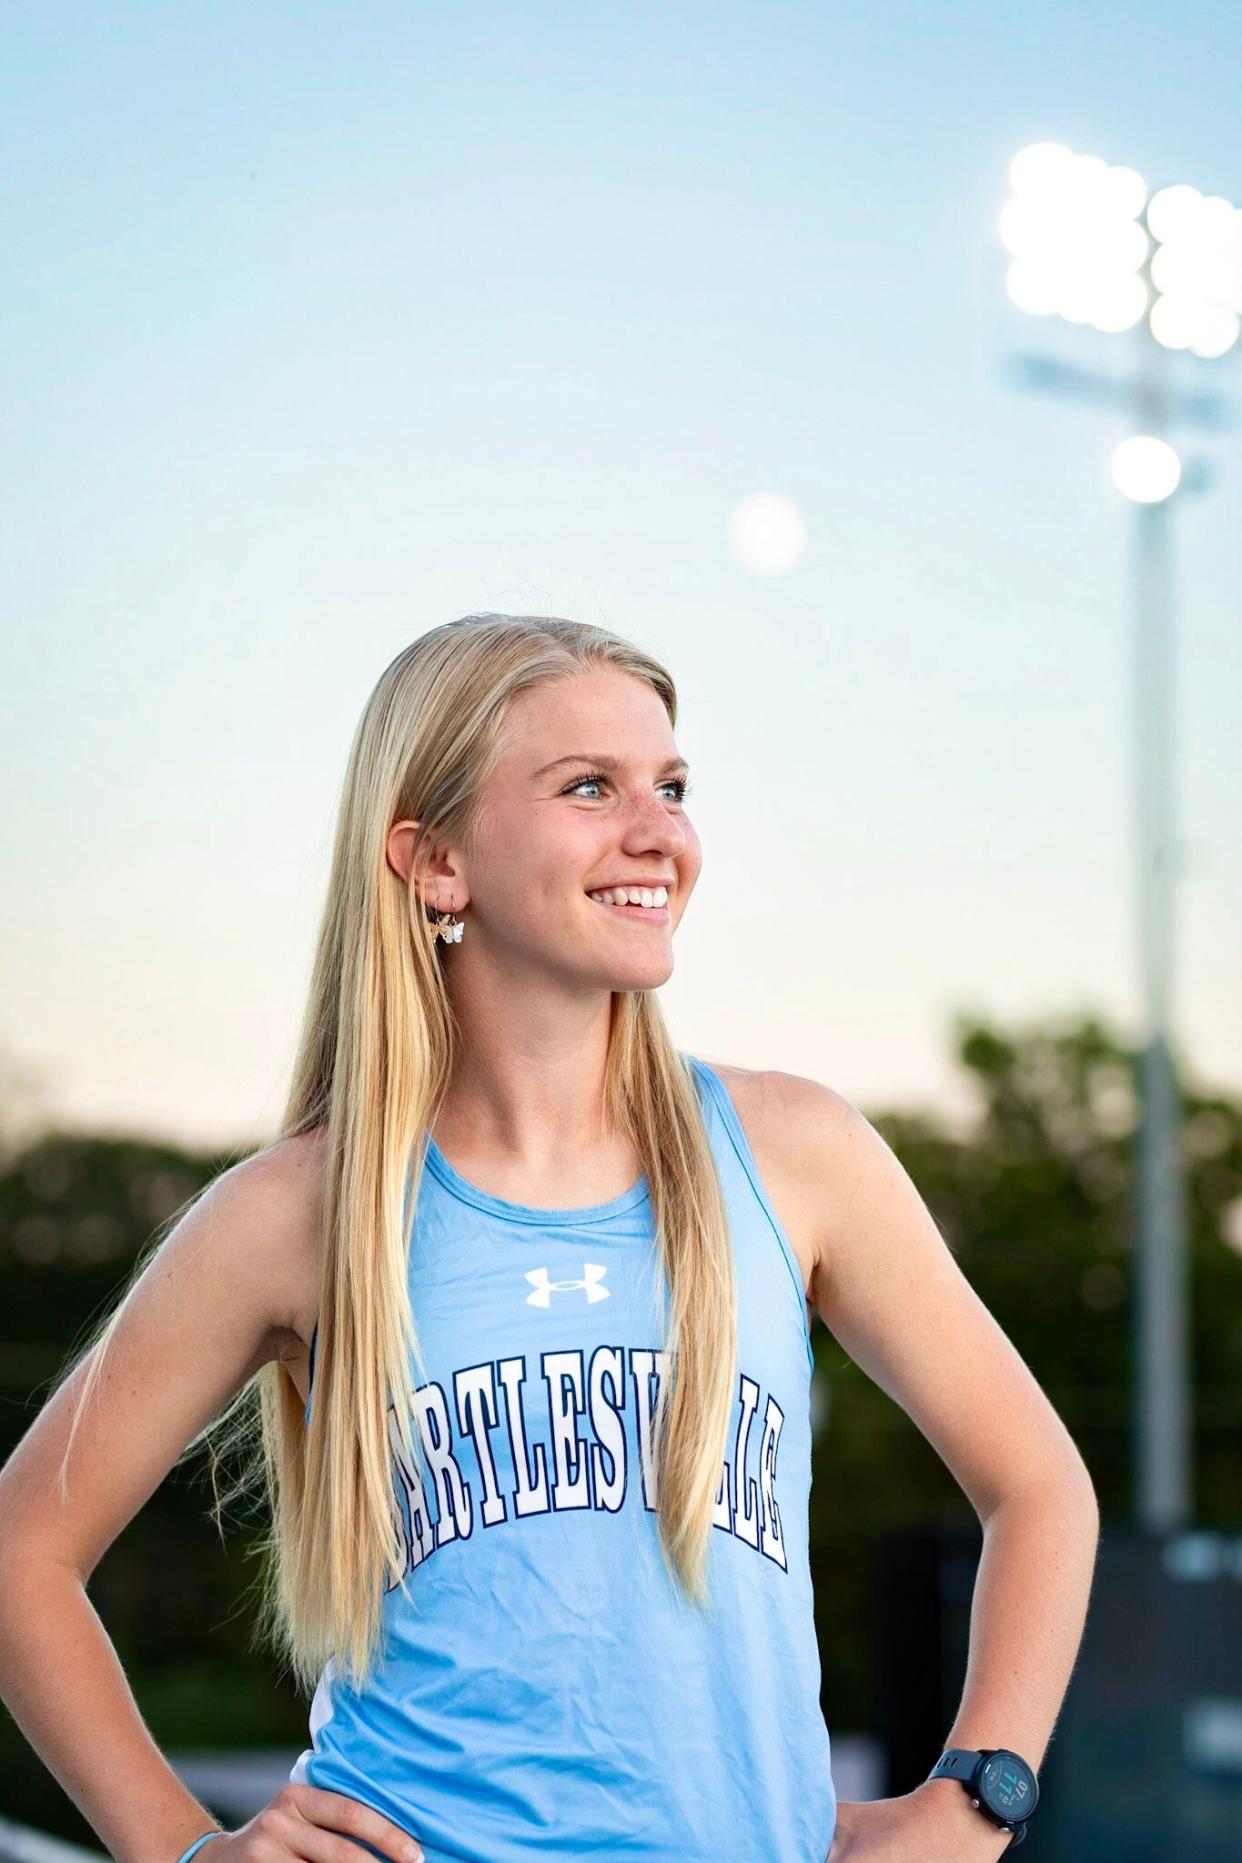 Senior Gentry Turner has excelled in both track and cross country during her Bartlesville High School running career.